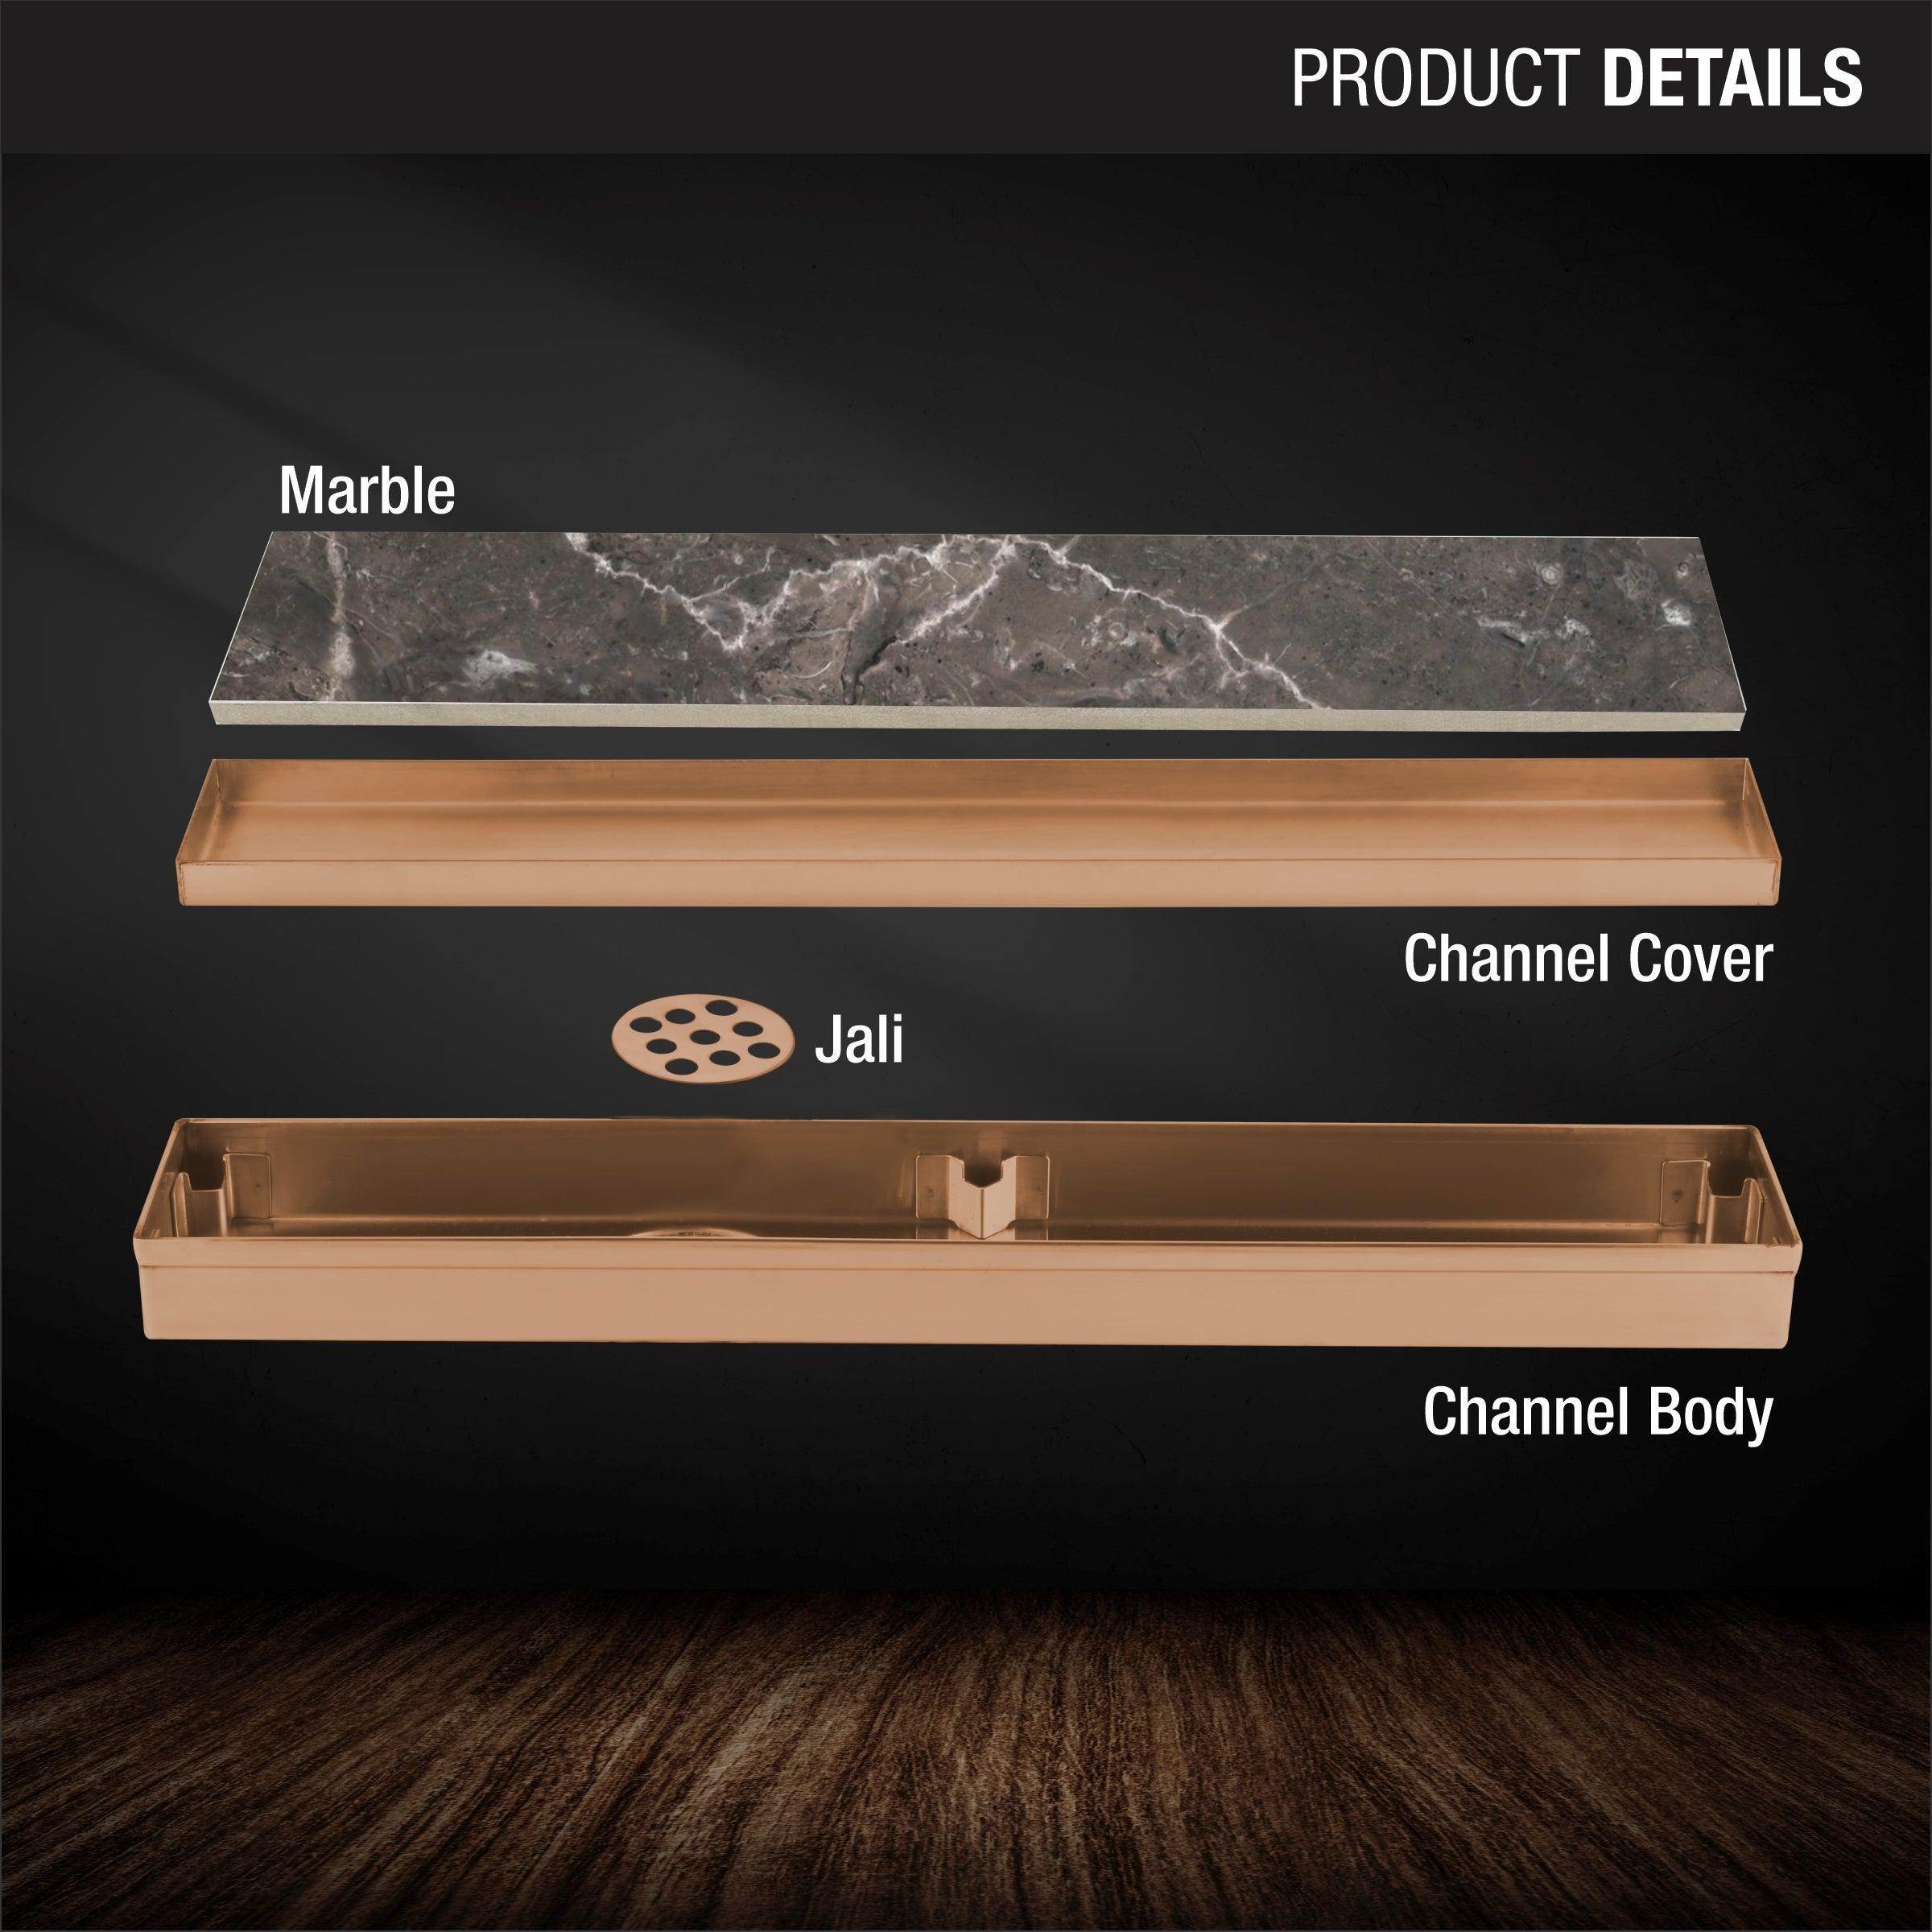 Marble Insert Shower Drain Channel - Antique Copper (18 x 2 Inches) product details